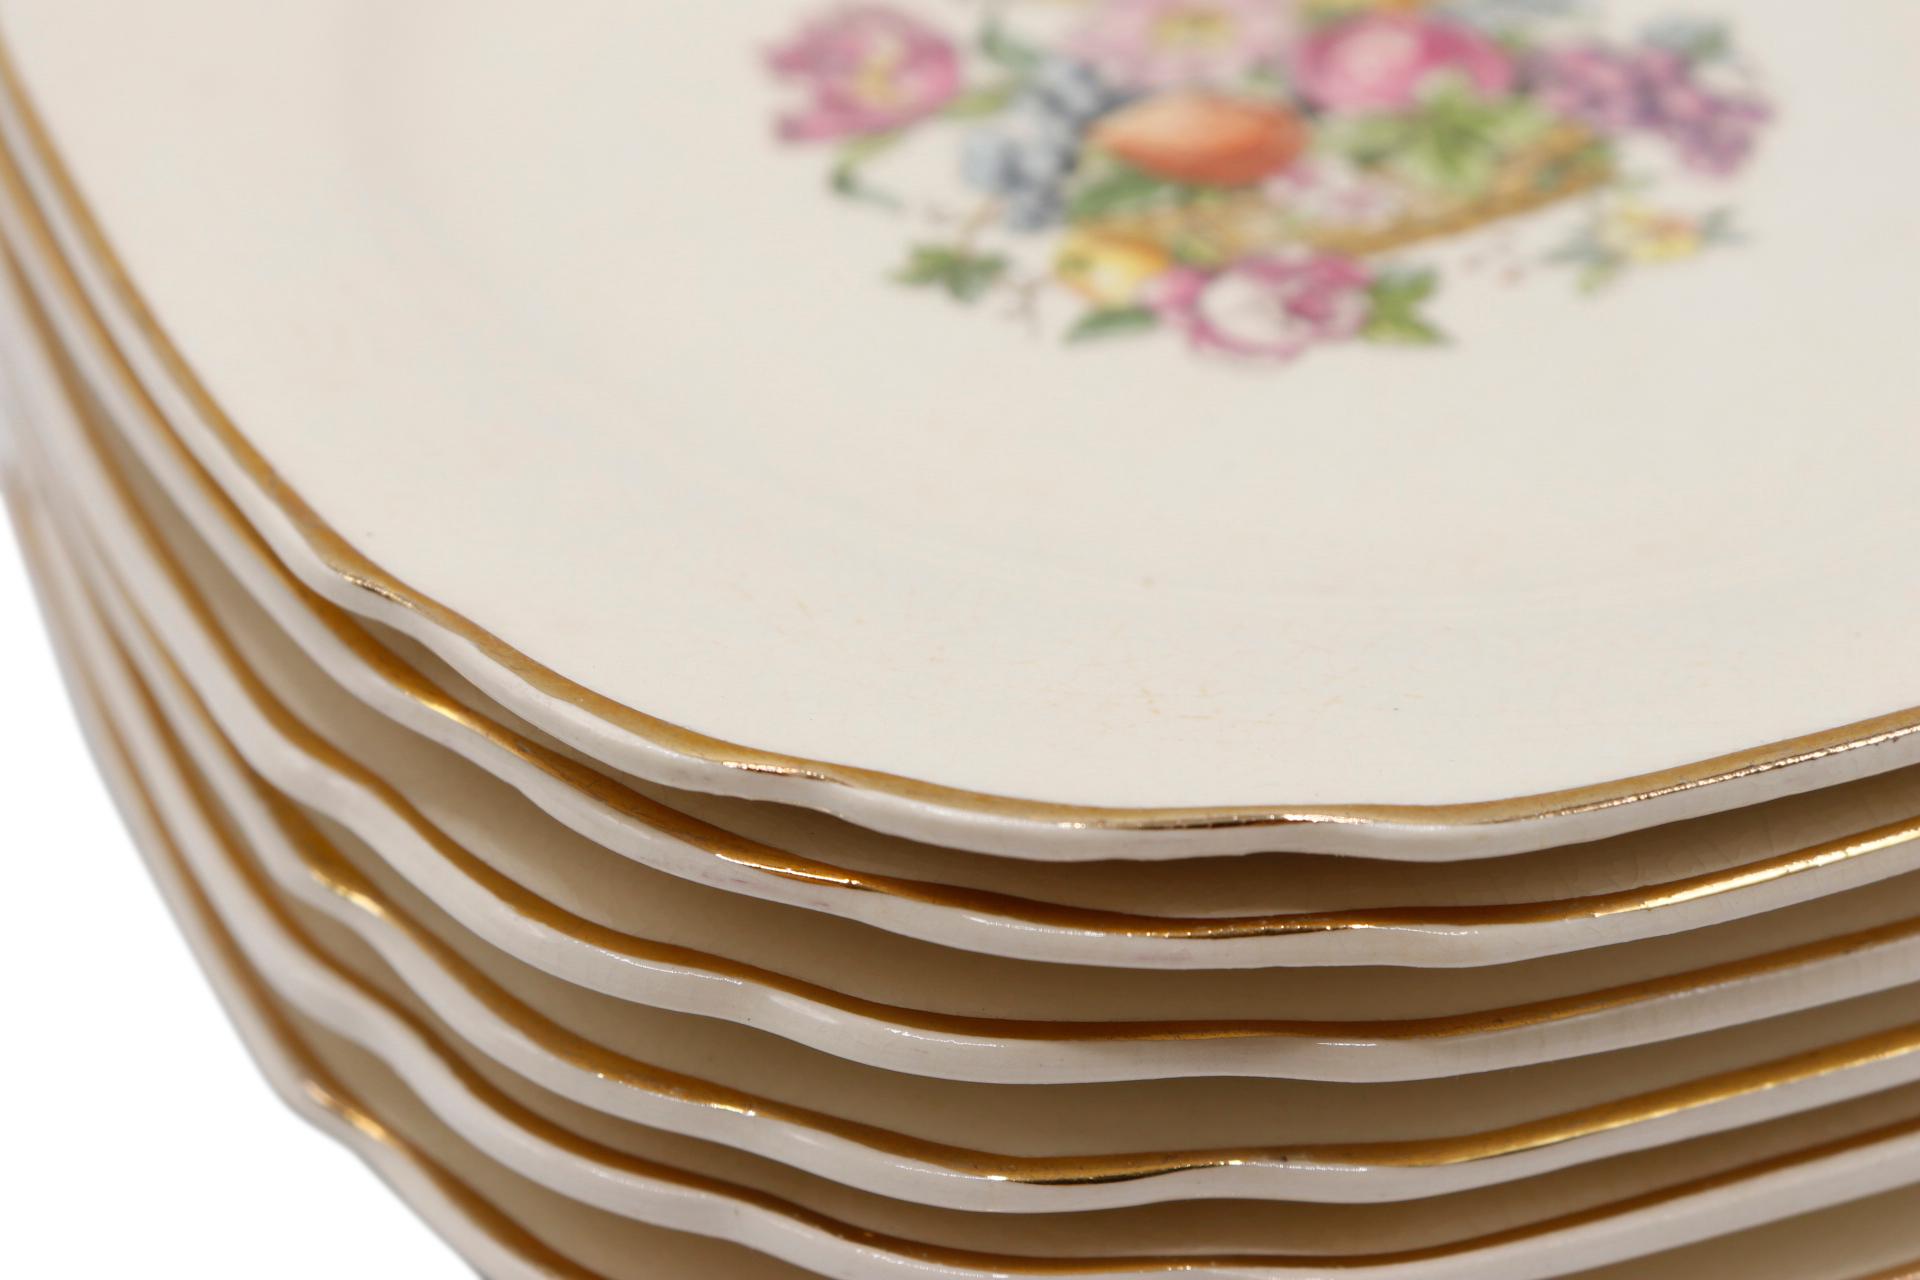 Harker Bread & Butter Plates, Set of 6 In Good Condition For Sale In Bradenton, FL